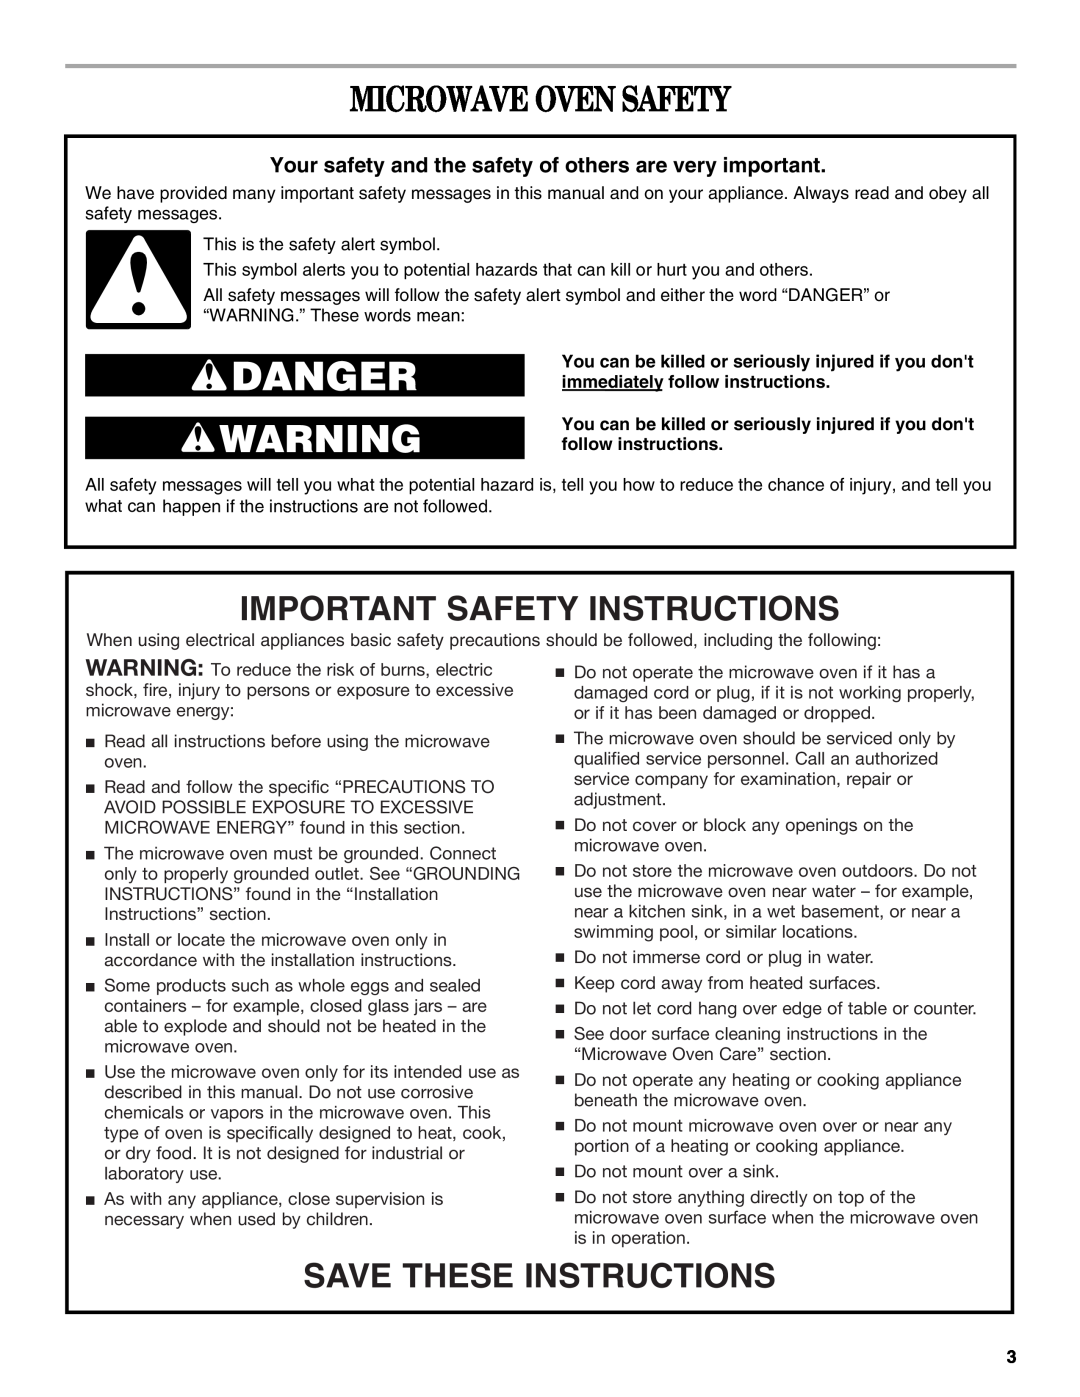 Whirlpool MT1120SL manual Microwave Oven Safety, Important Safety Instructions, Save These Instructions 